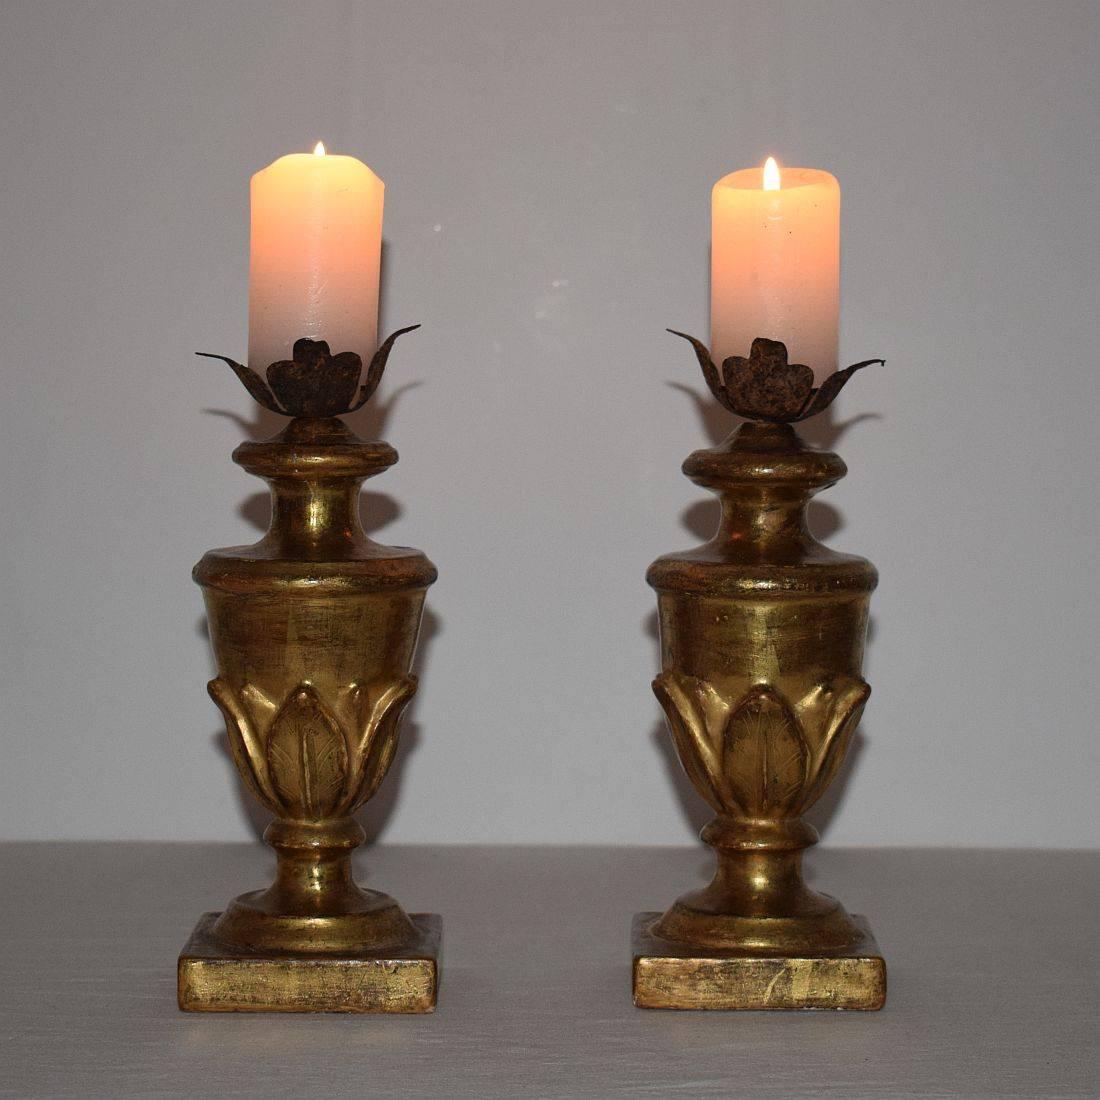 Great pair of small gilded candleholders with their original gilding
Italy, circa 1780-1800. Good condition.